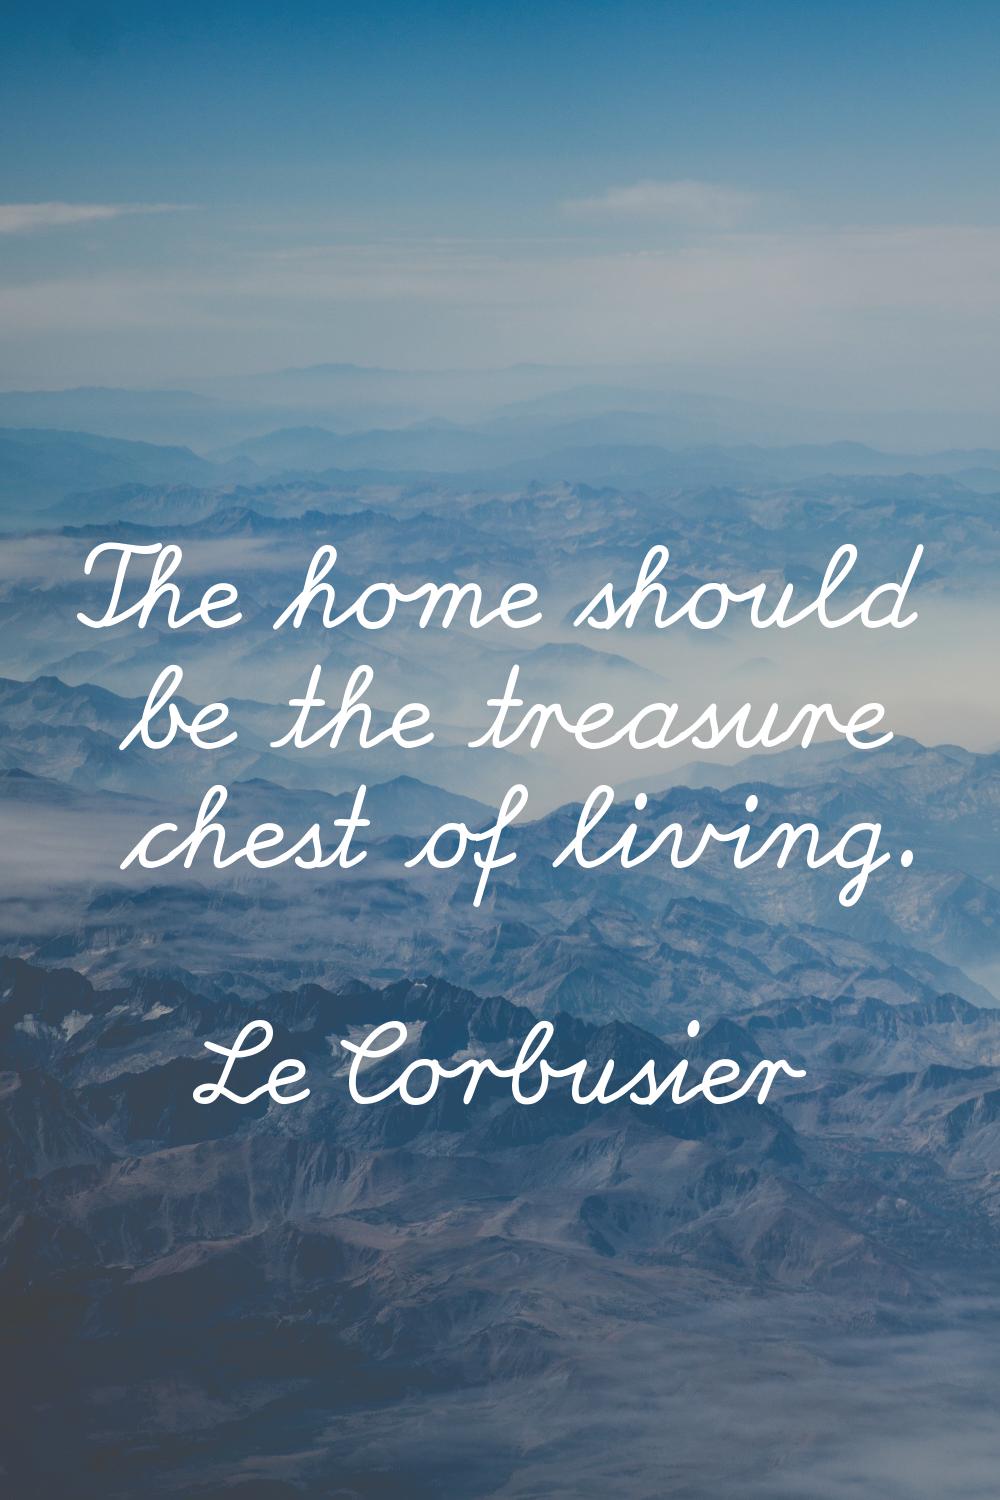 The home should be the treasure chest of living.